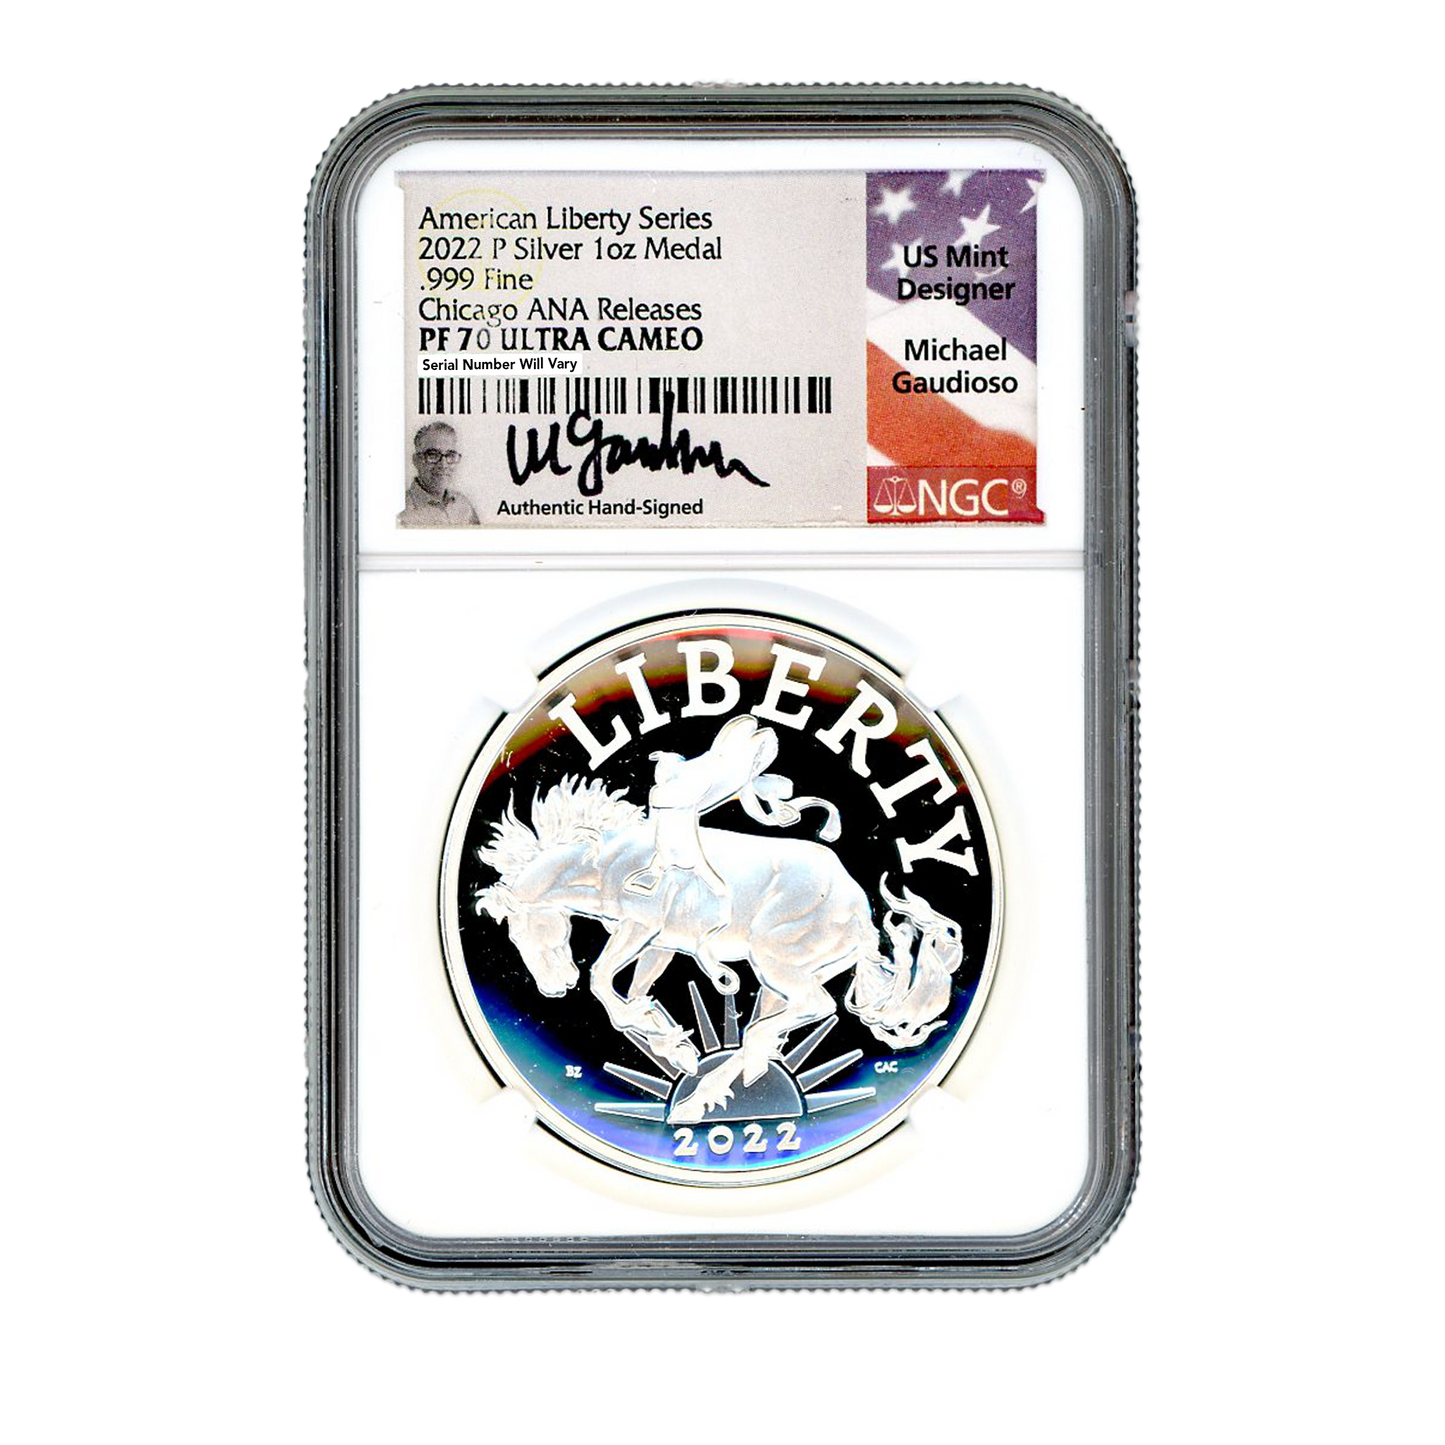 2022 P 1 Oz Silver Liberty Medal - Chicago ANA Releases NGC PF70 Ultra Cameo Gaudioso Label